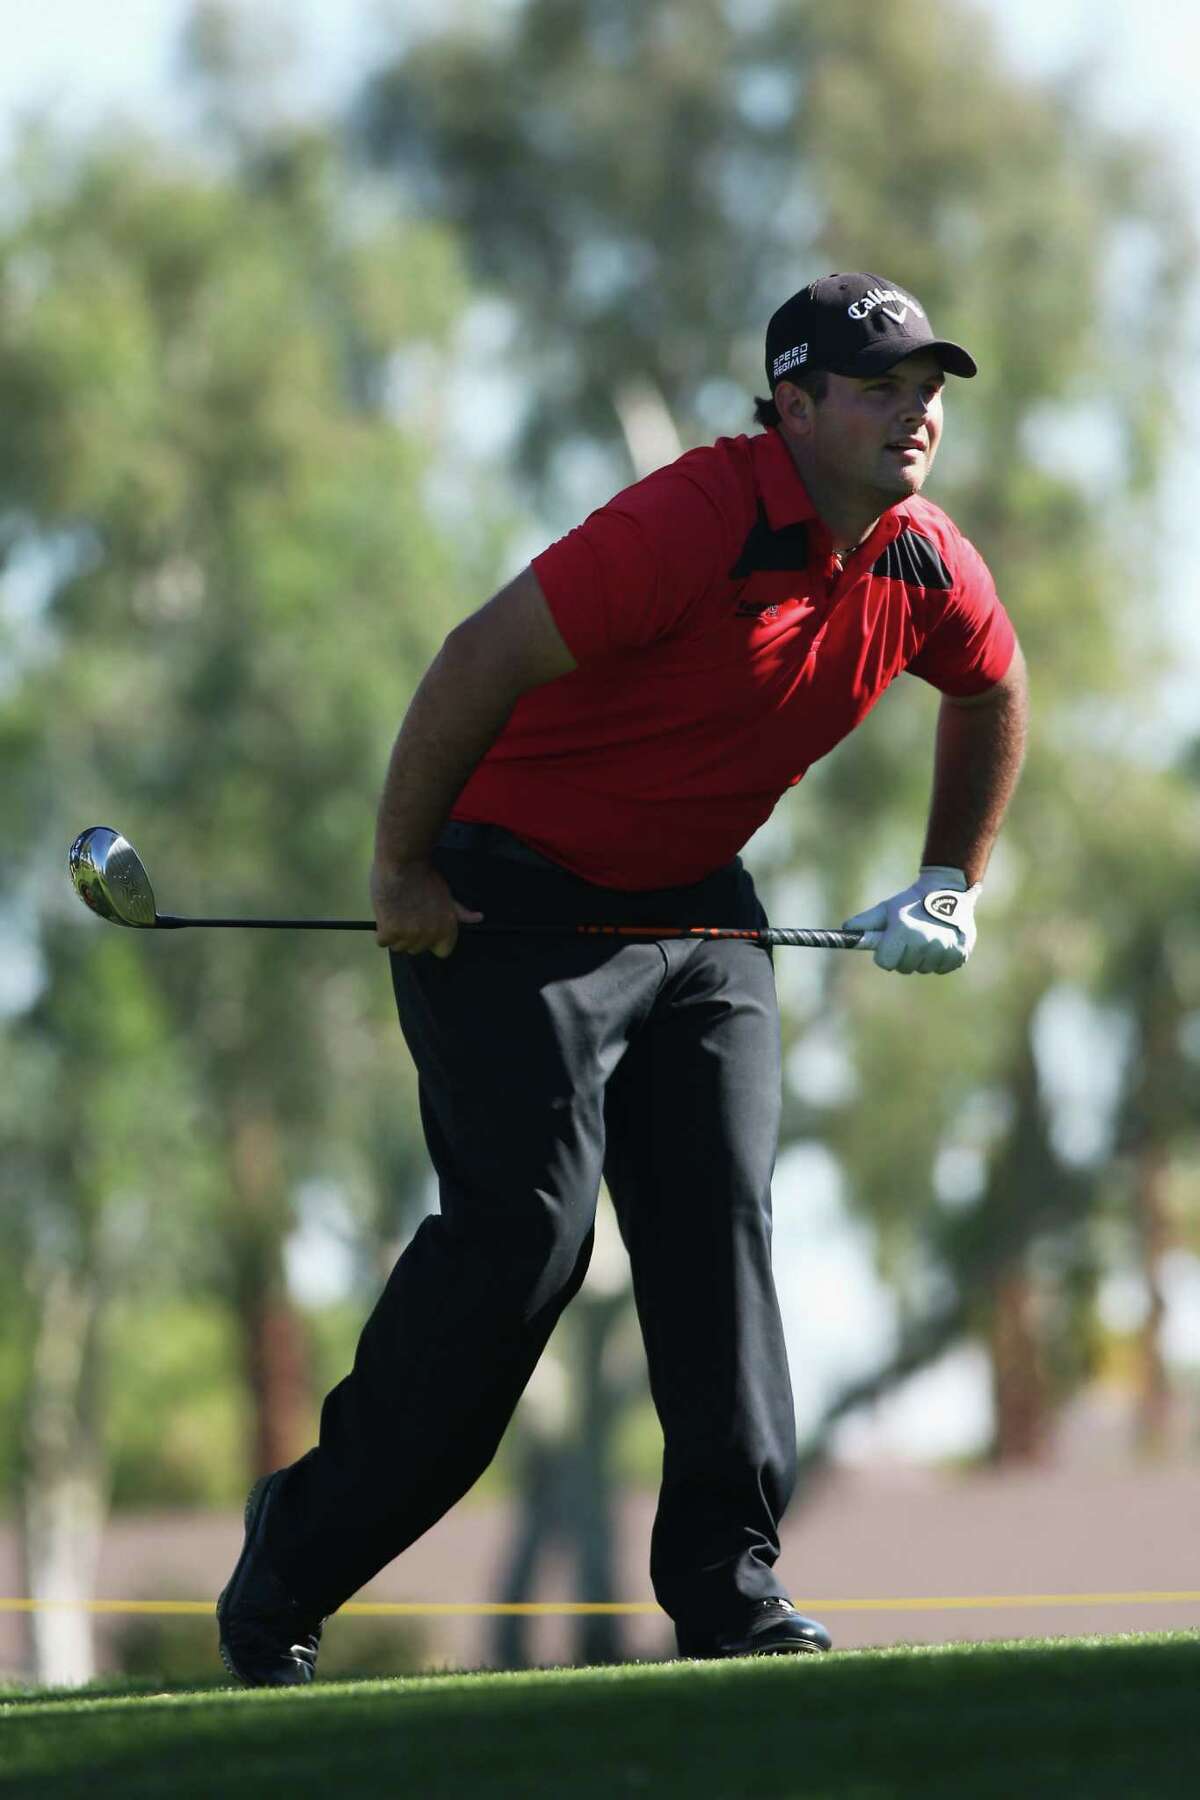 Spring's Patrick Reed tracks the flight of his tee shot as he recorded a second straight 63 on Friday.